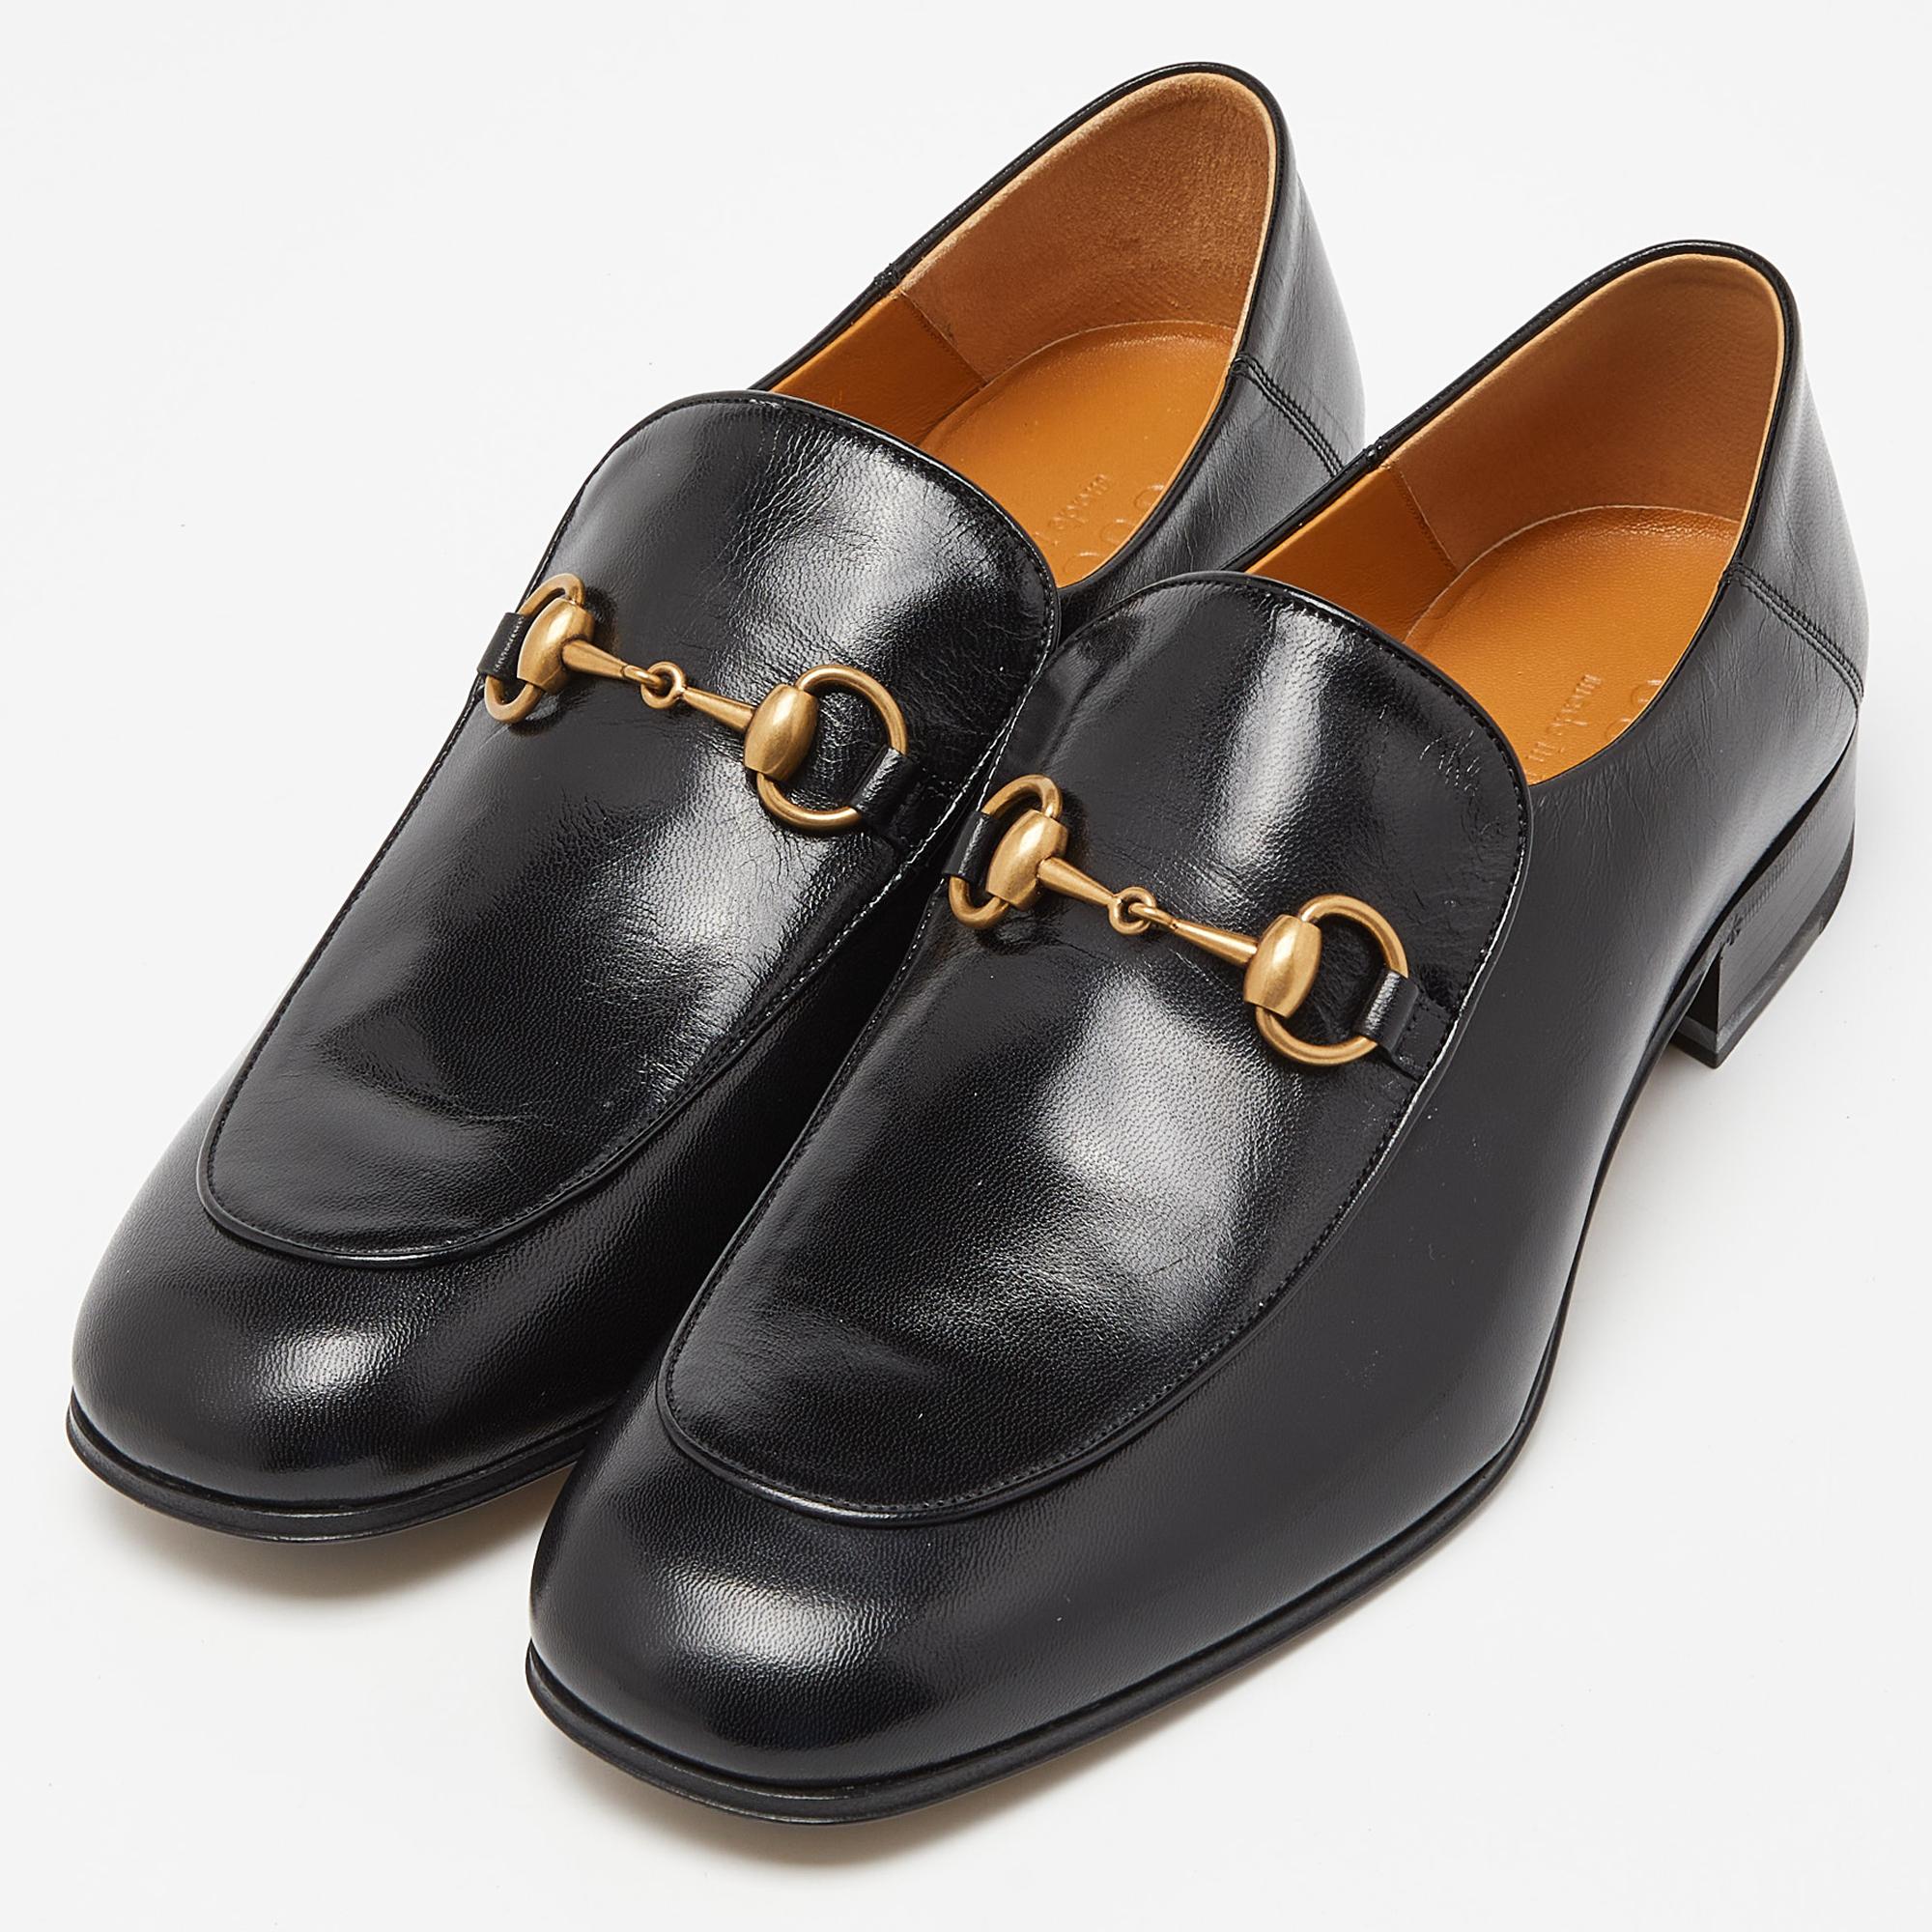 Move in style and comfort with this pair of loafers by Gucci. The shoes have been crafted from leather into a round-toe silhouette and highlighted with the Horsebit on the uppers.

